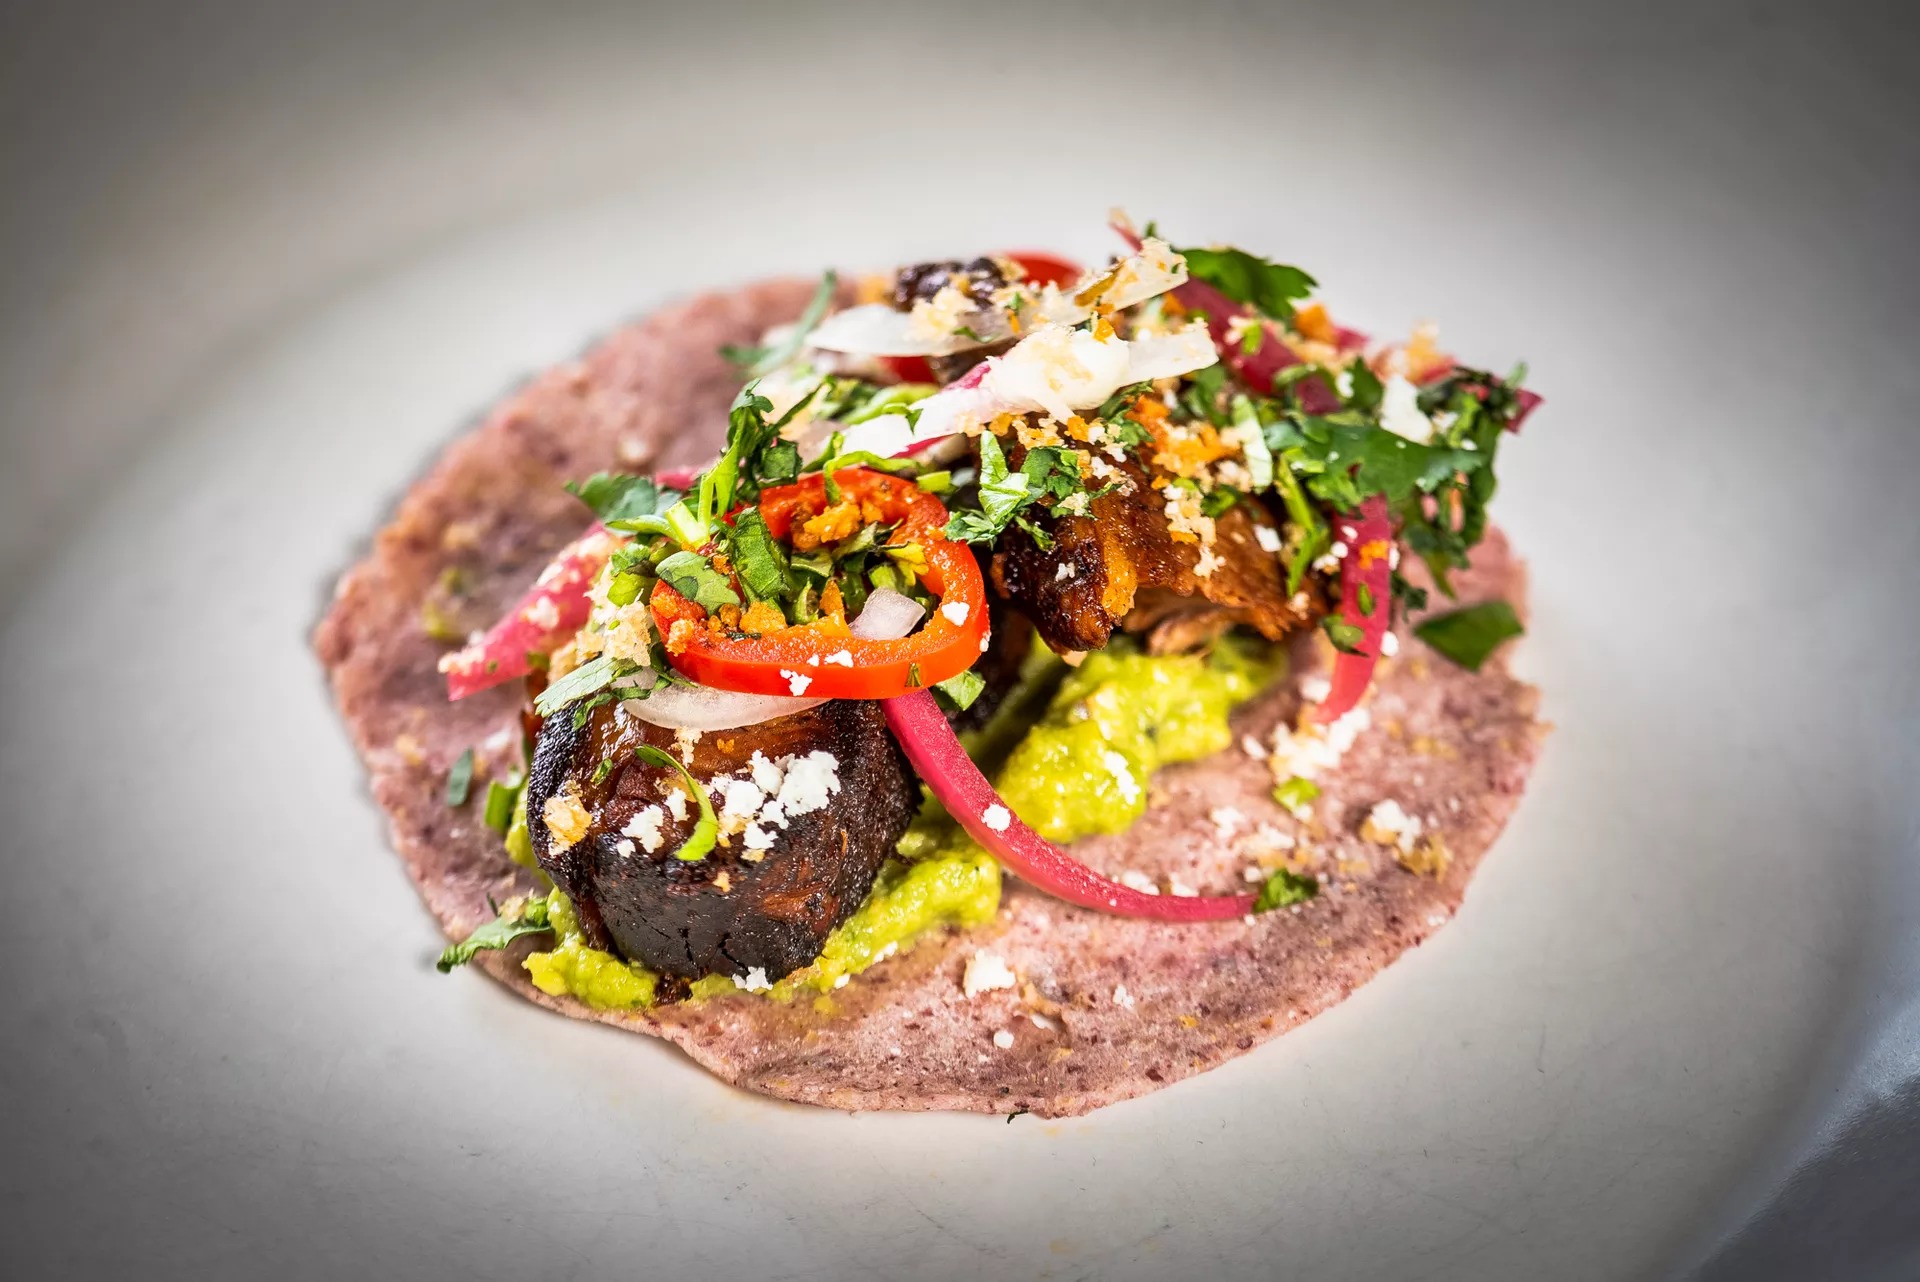 A brisket barbacoa taco from Poca Madre made with rare red corn from Oaxaca.